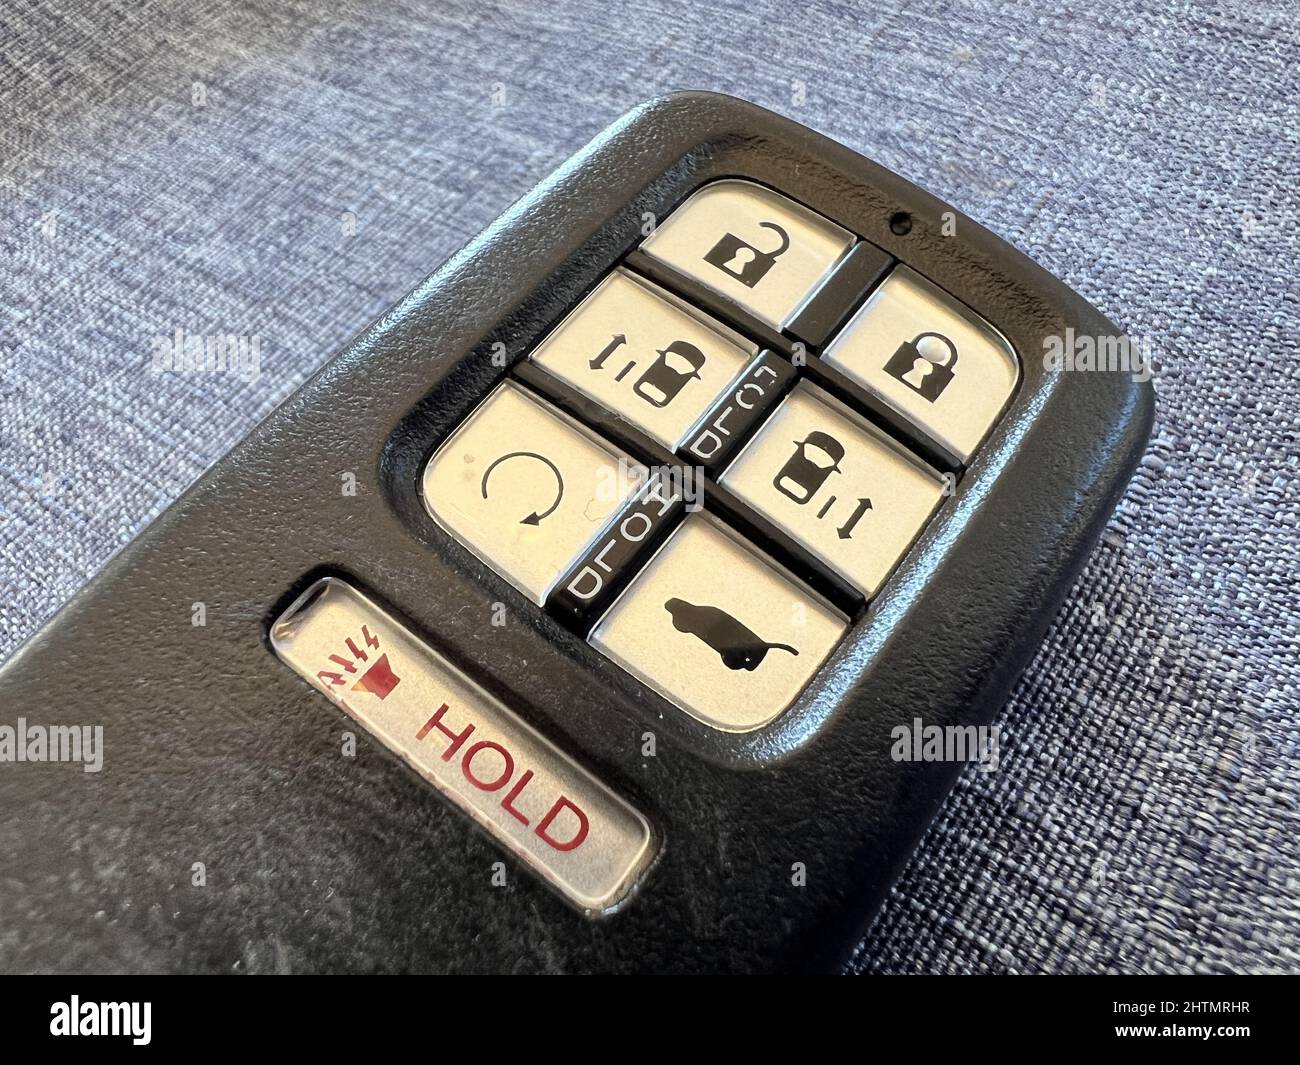 Automotive keyfob with buttons for remote engine start, door locking and unlocking, and car alarm panic button on light gray surface, Lafayette, California, January 20, 2022. Photo courtesy Tech Trends. Stock Photo